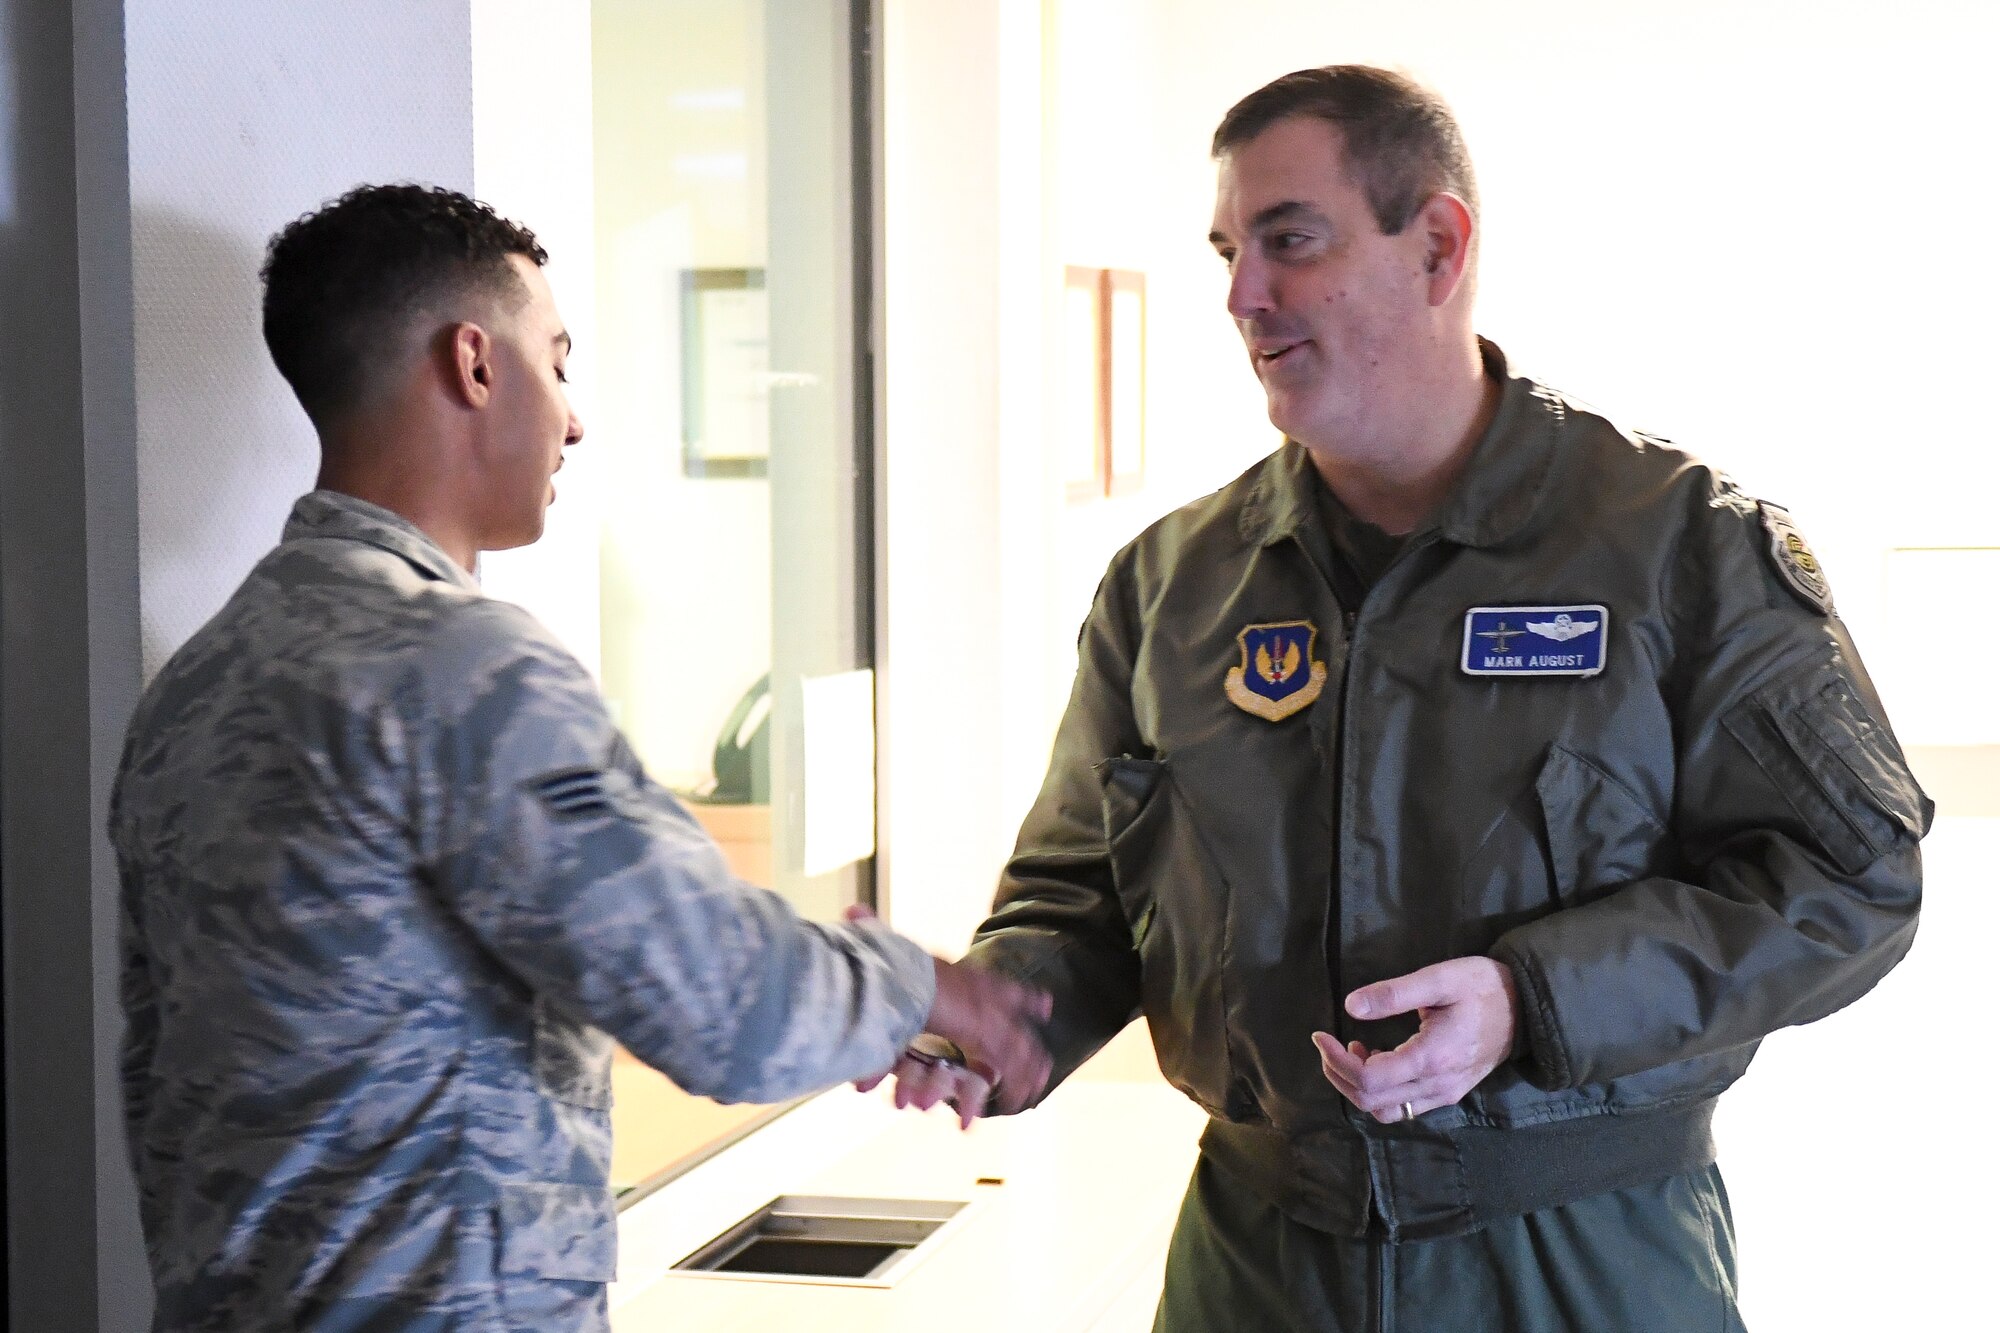 U.S. Air Force Brig. Gen. Mark R. August, 86th Airlift Wing commander, presents a coin to U.S. Air Force Senior Airman Cadairo Domino, 86th Security Forces Squadron installation patrolman, on Ramstein Air Base, Germany, Dec. 6, 2018. Domino received the honor of being Ramstein’s Airlifter of the Week for assisting a pregnant mother through active labor during entry controller duties in late October. (U.S. Air Force photo by Staff Sgt. Devin Boyer)